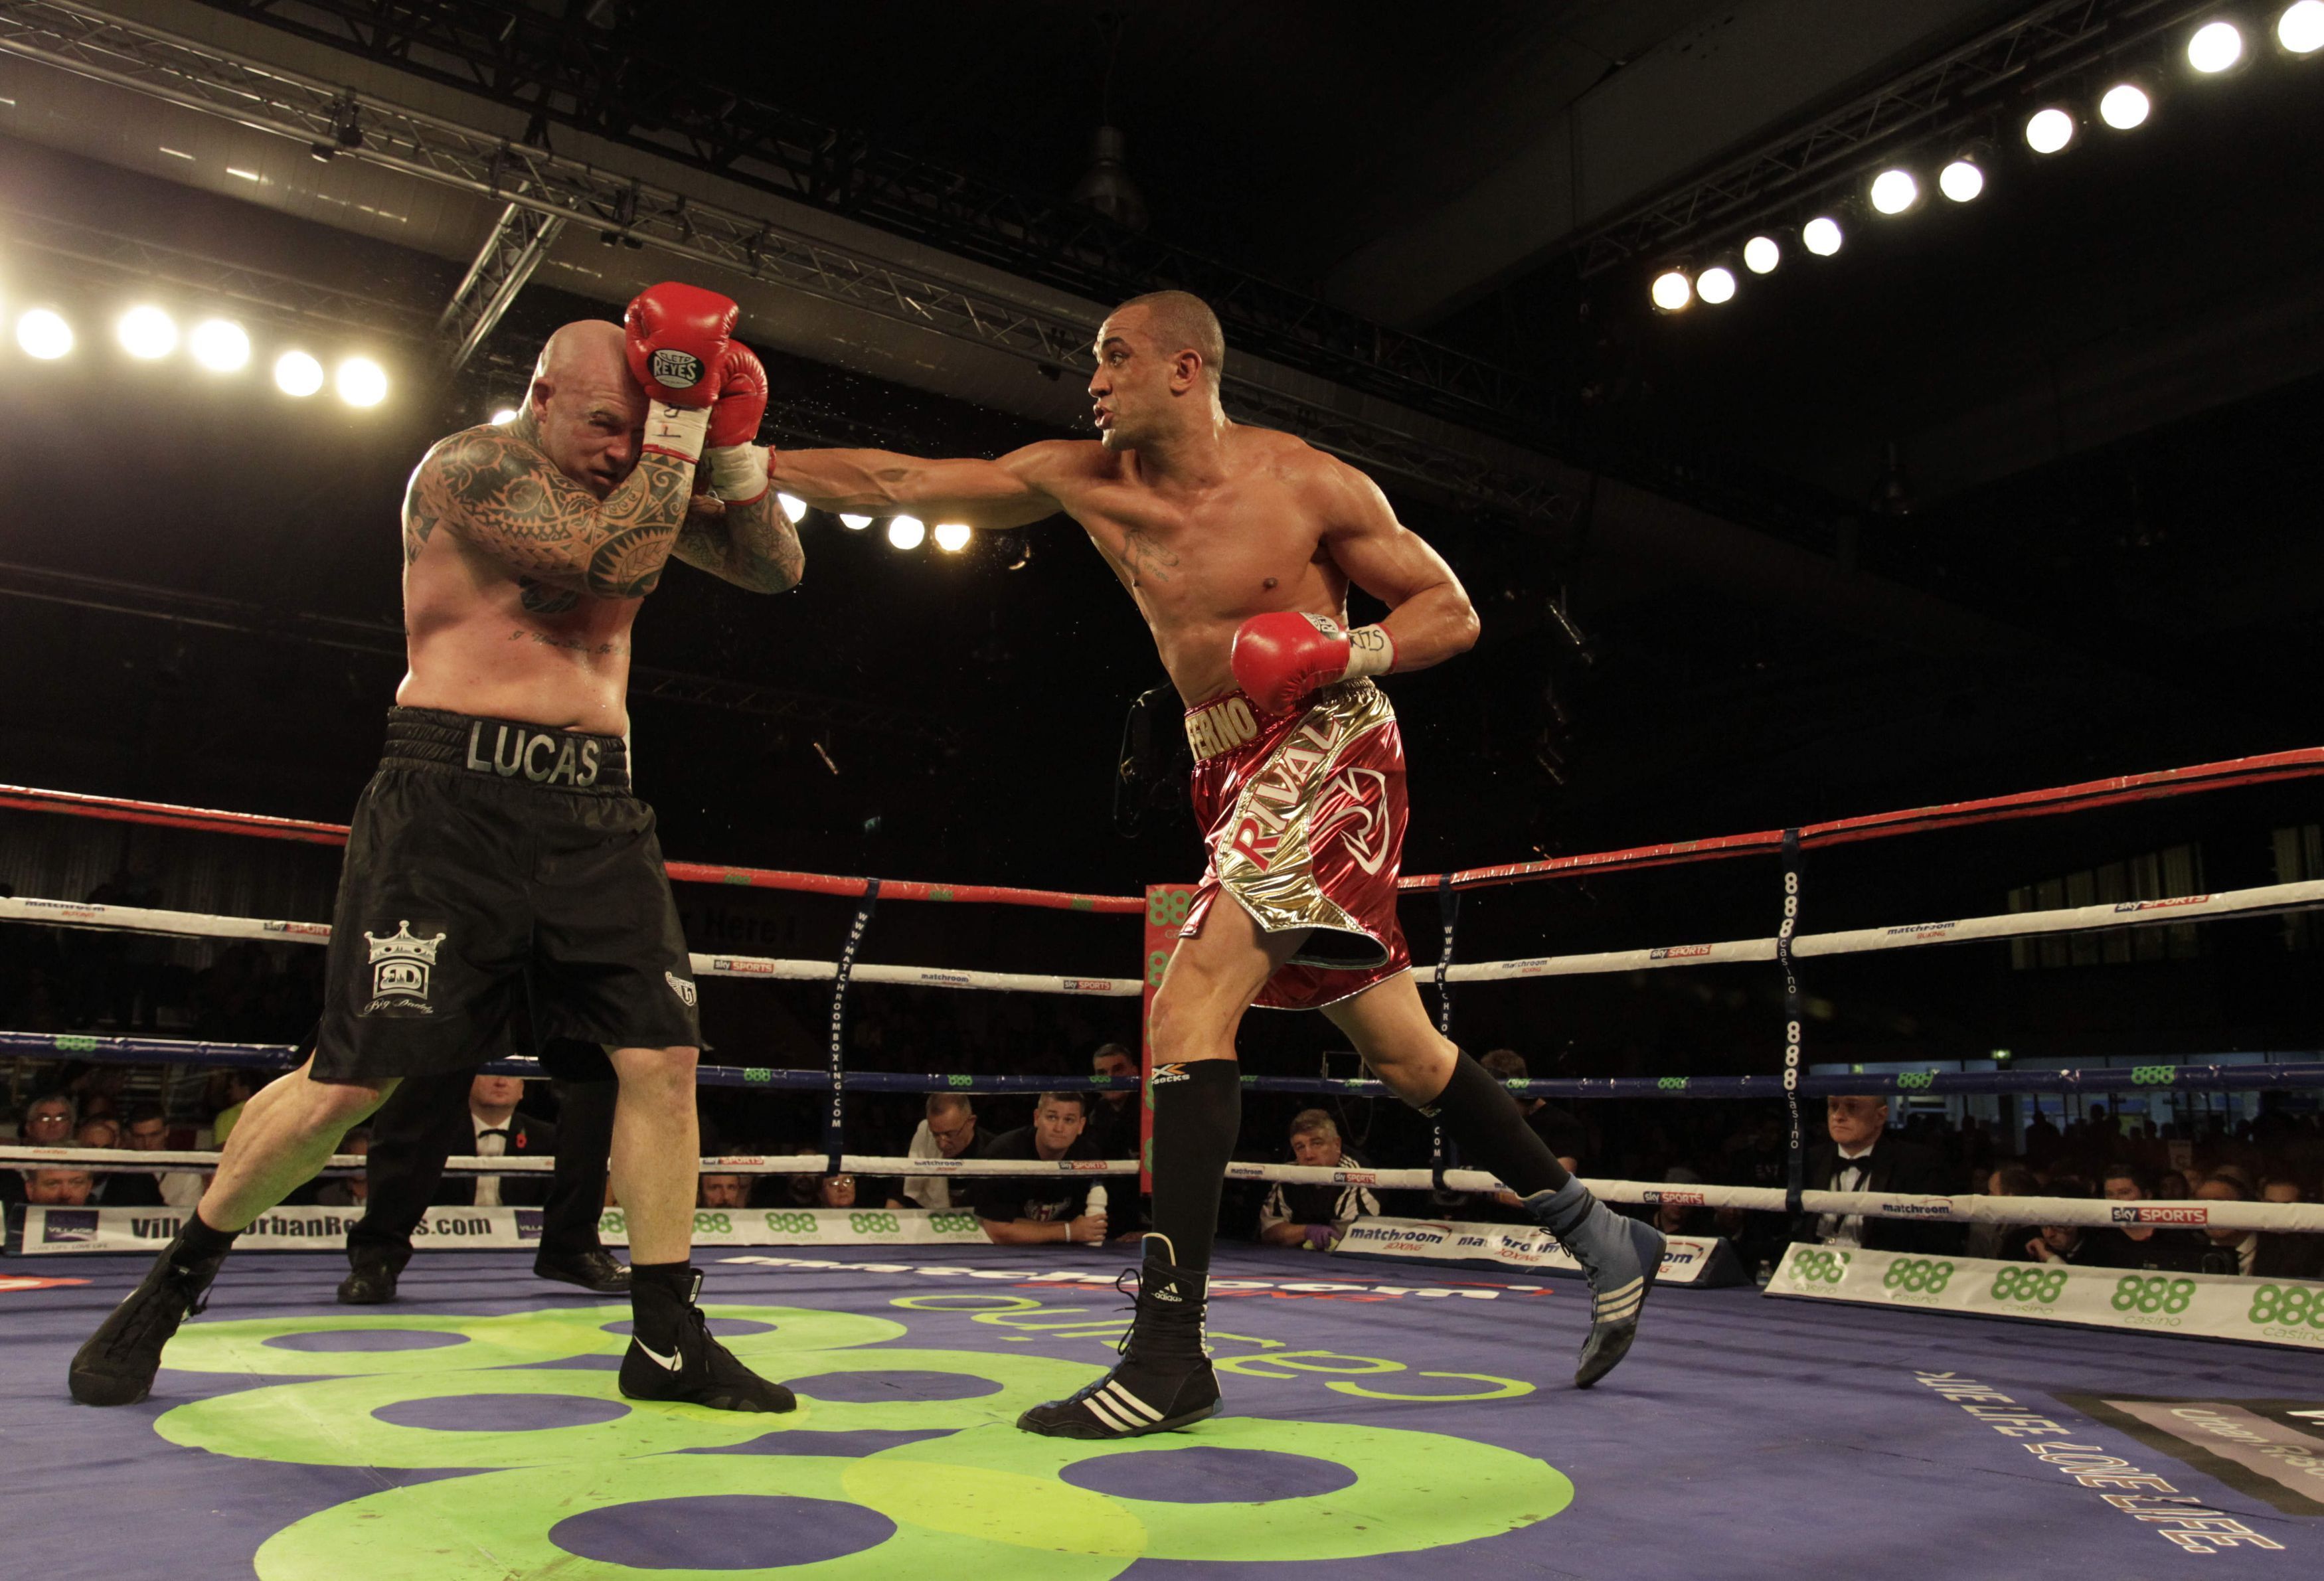 A boxing match between Lucas Browne and Richard Towers